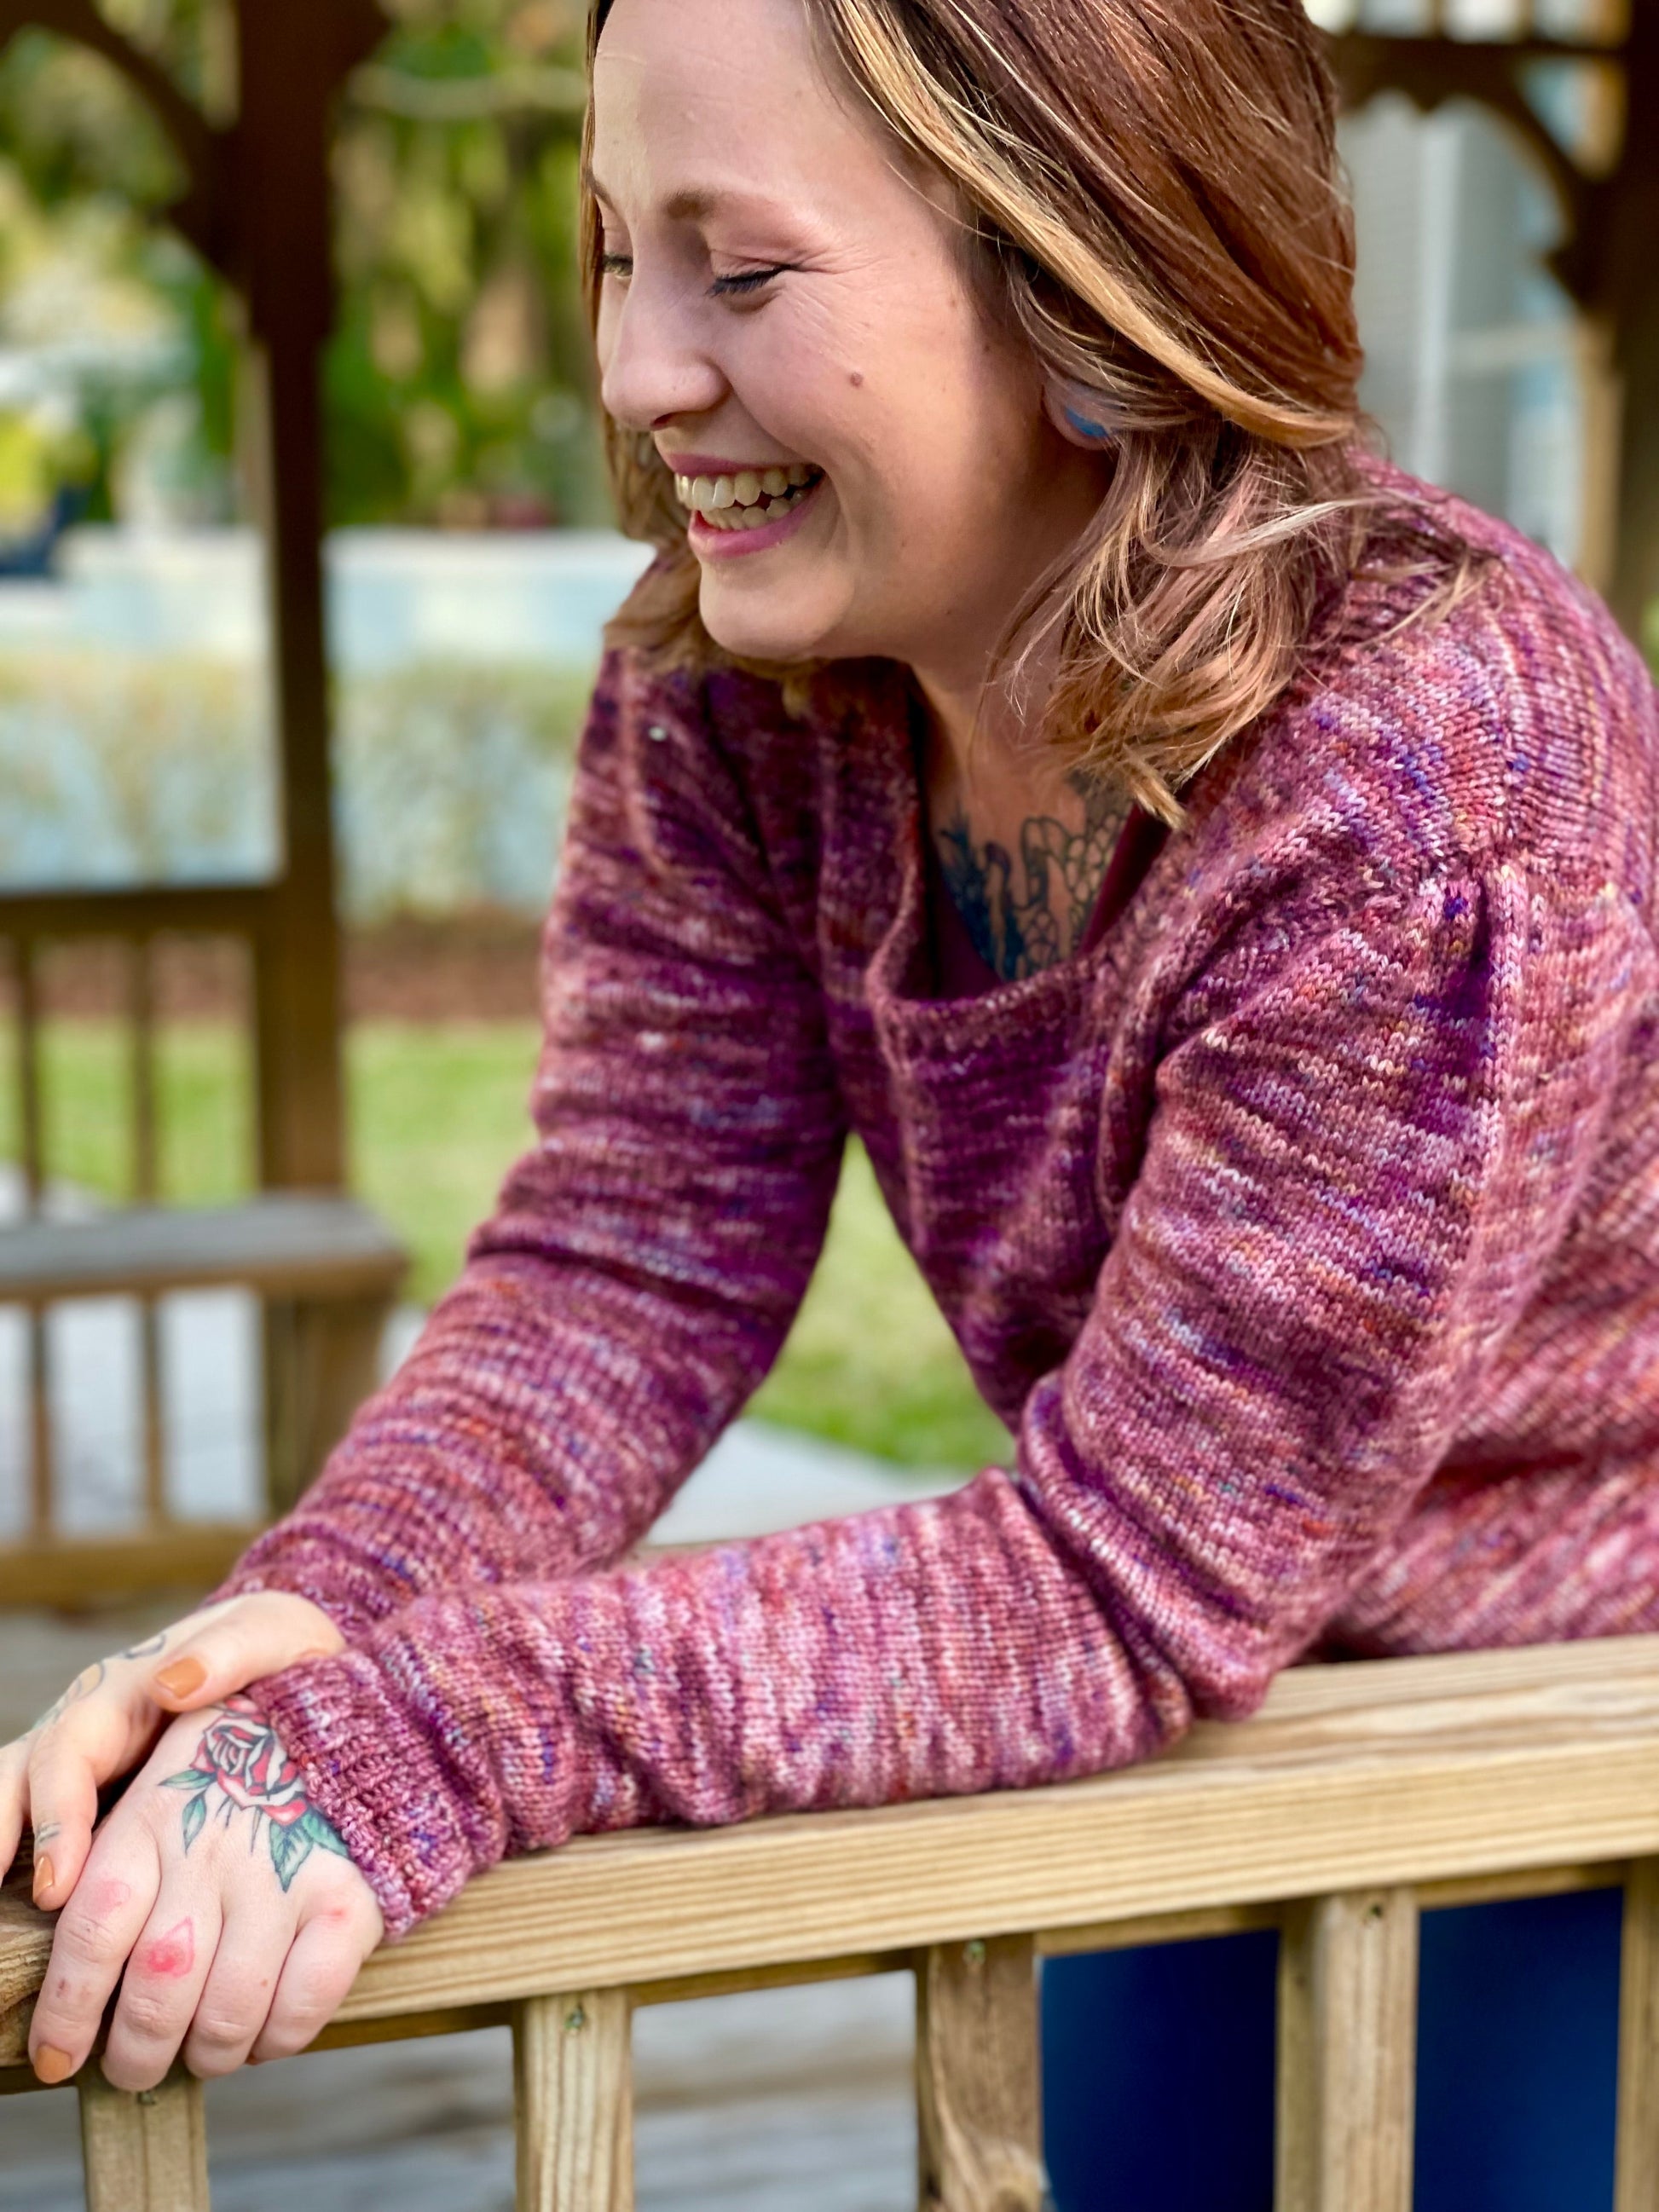 Bess laughs, leaning against a wooden deck railing. She wears a hand knit sweater, made from pink variegated yarn. The sleeves of the sweater have been gathered at the top to create pleats.